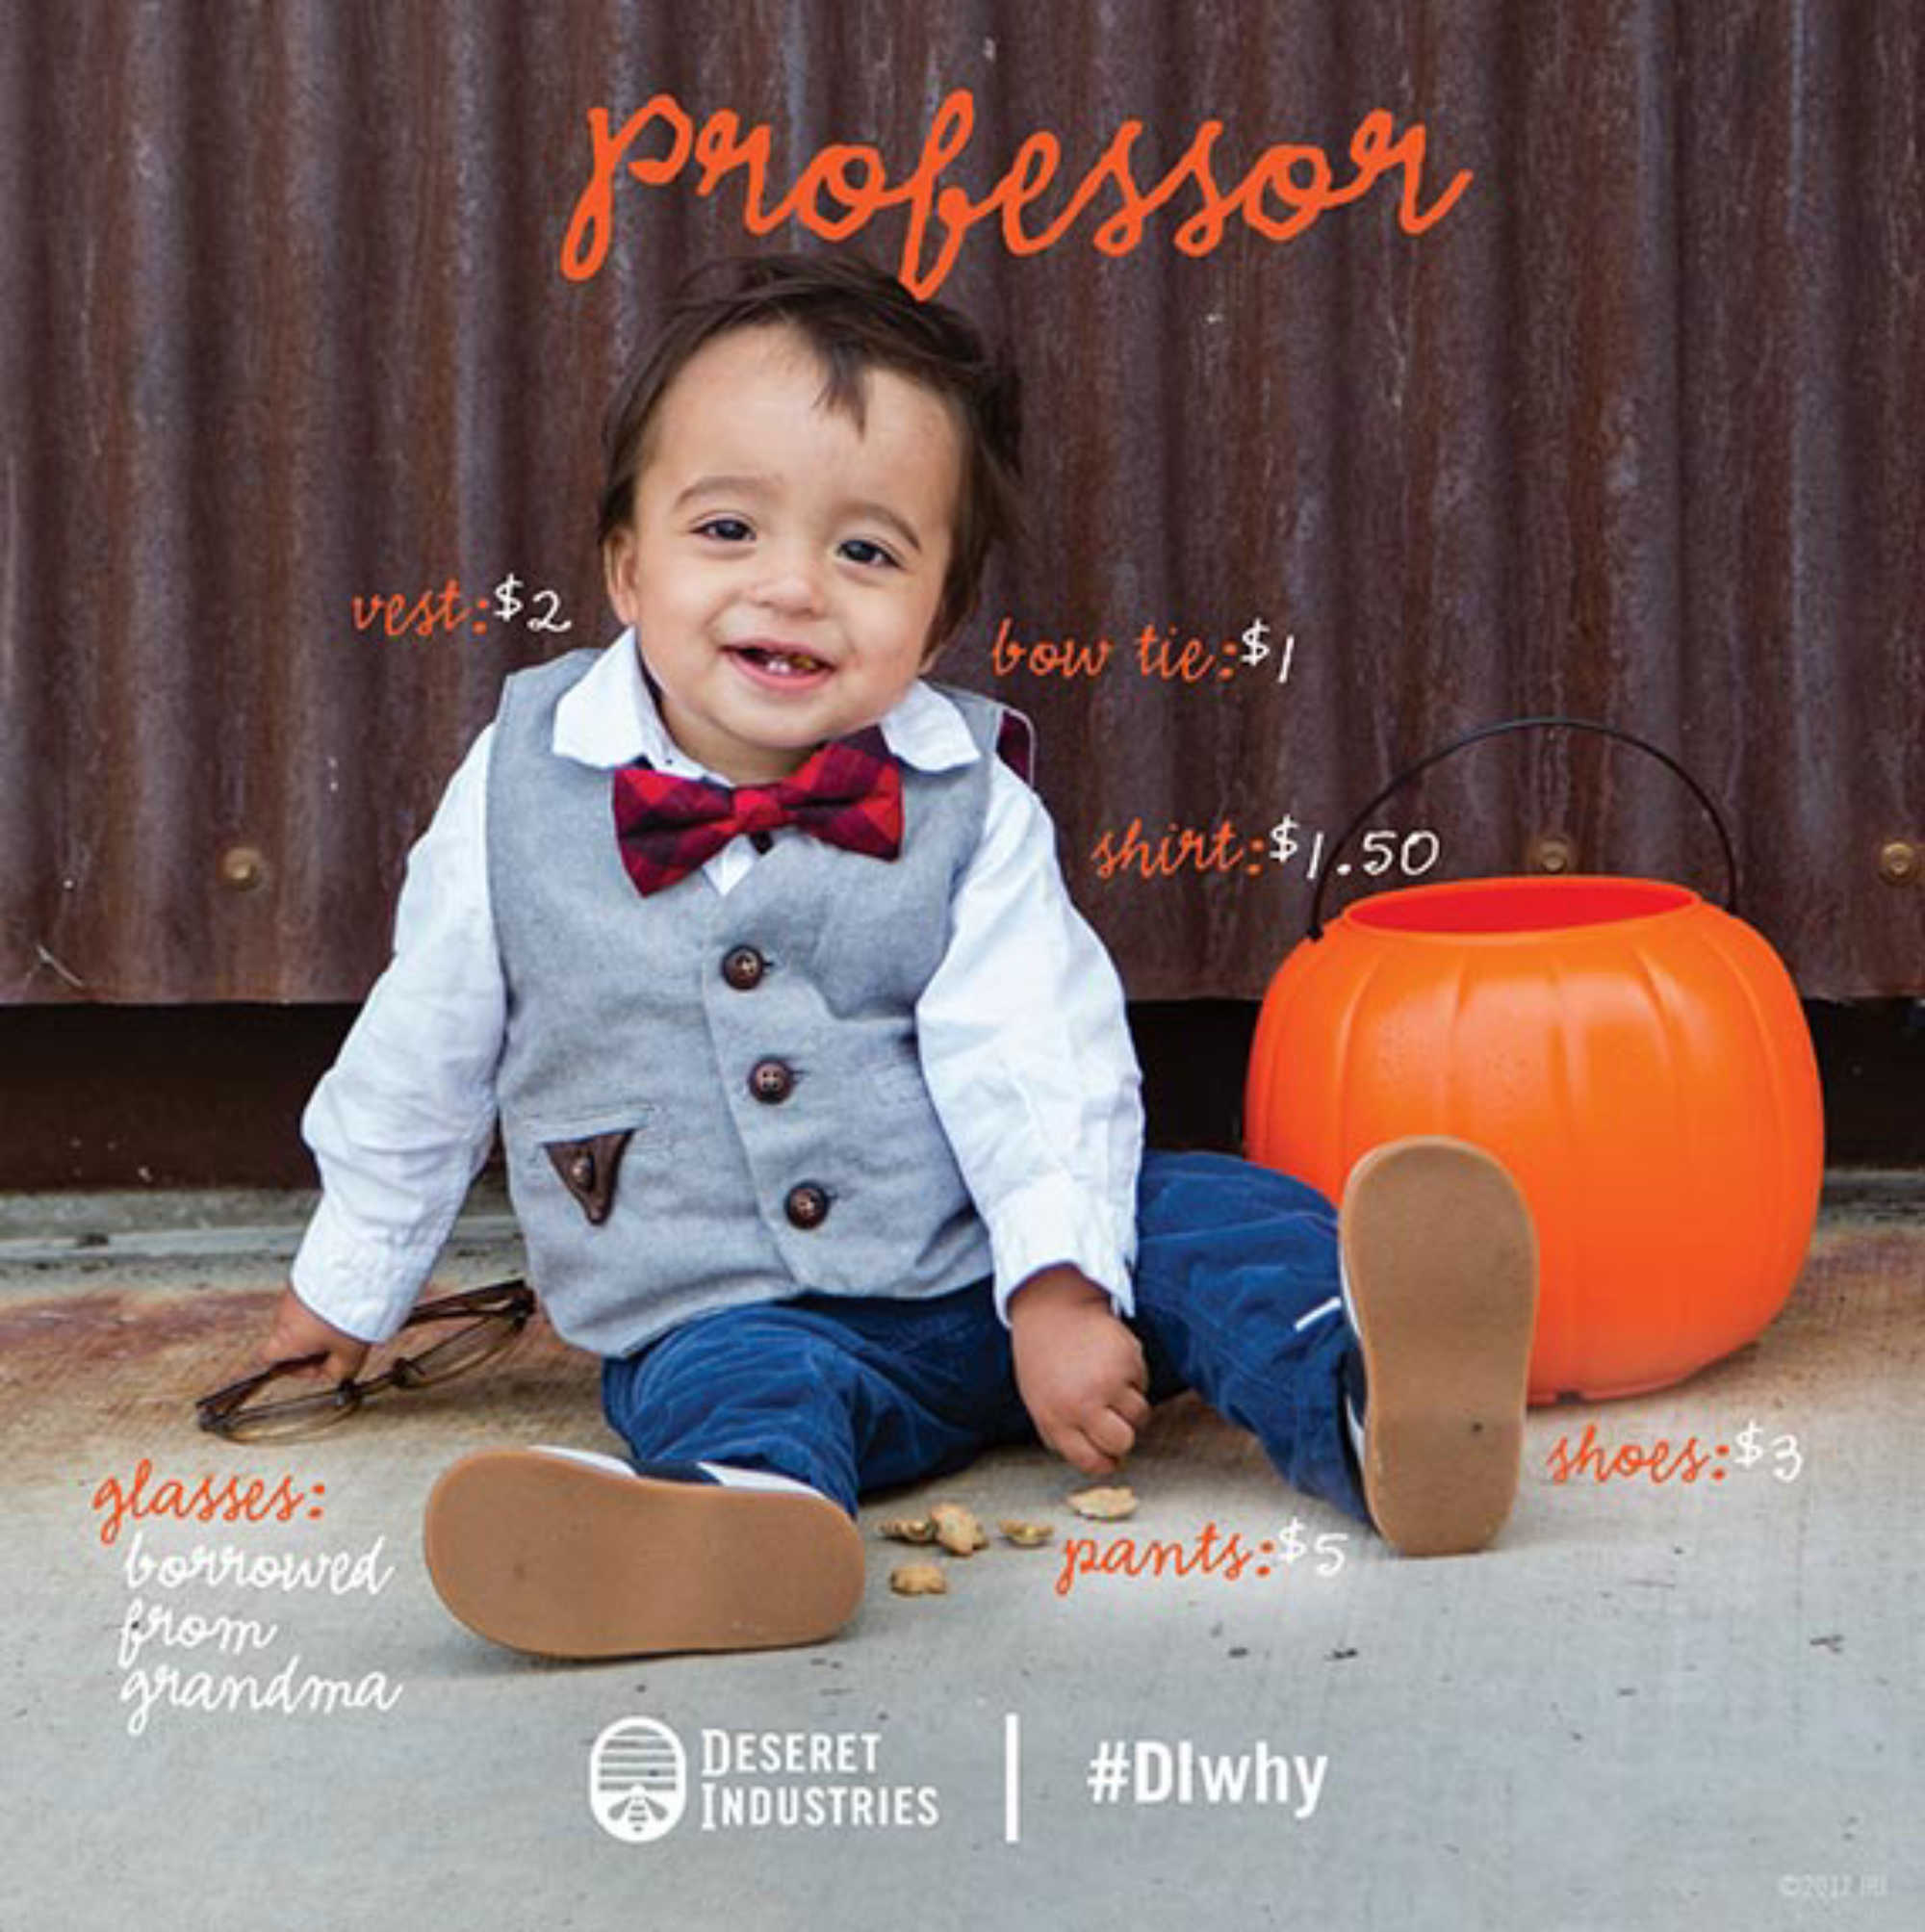 A baby dressed as a professor for Halloween